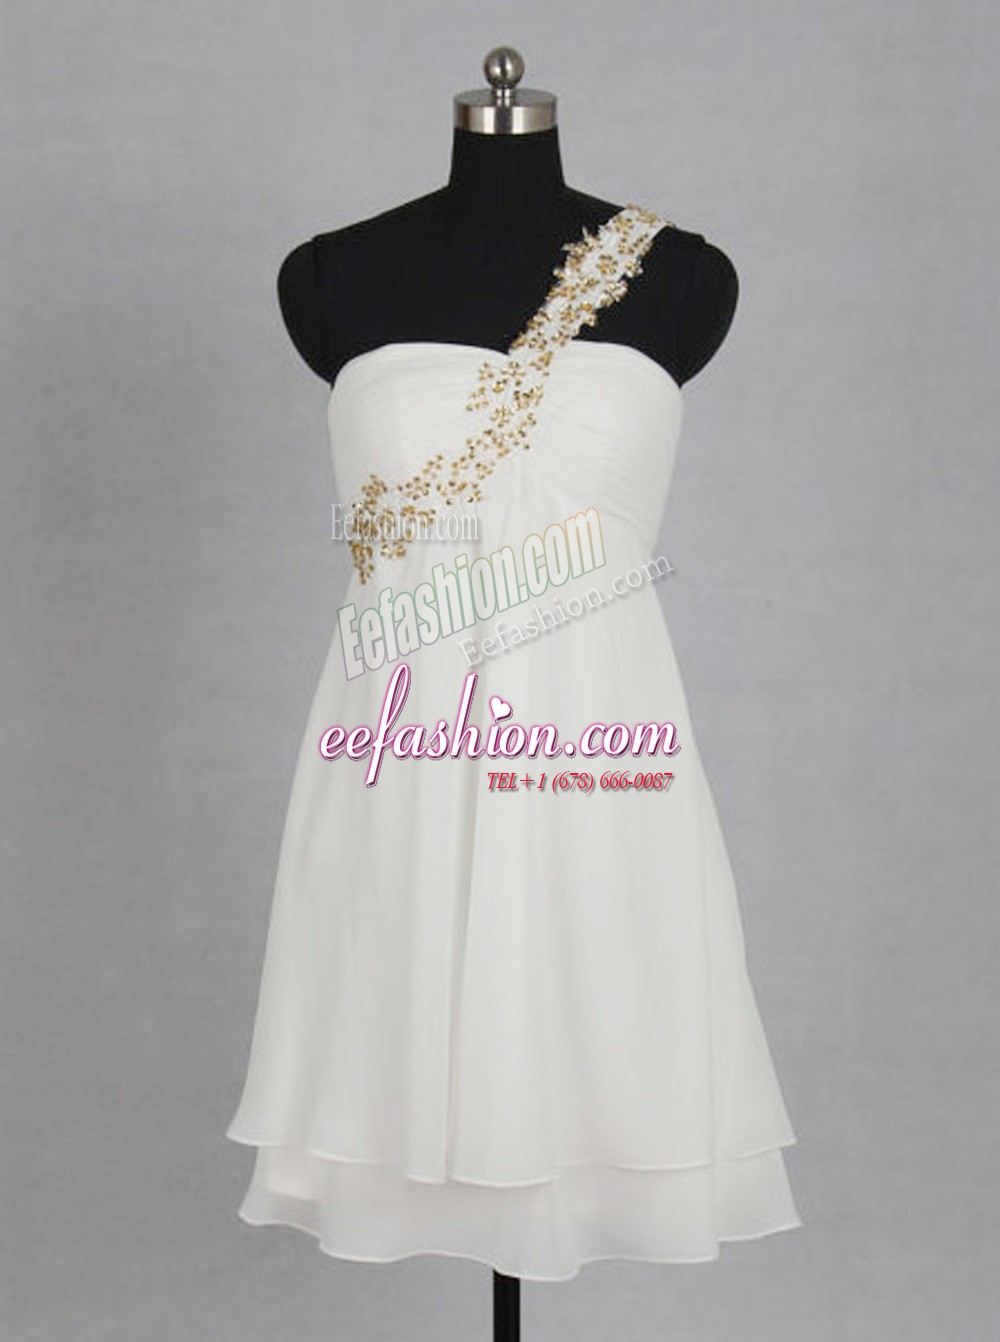 Deluxe One Shoulder White Sleeveless Chiffon Zipper Prom Evening Gown for Wedding Party